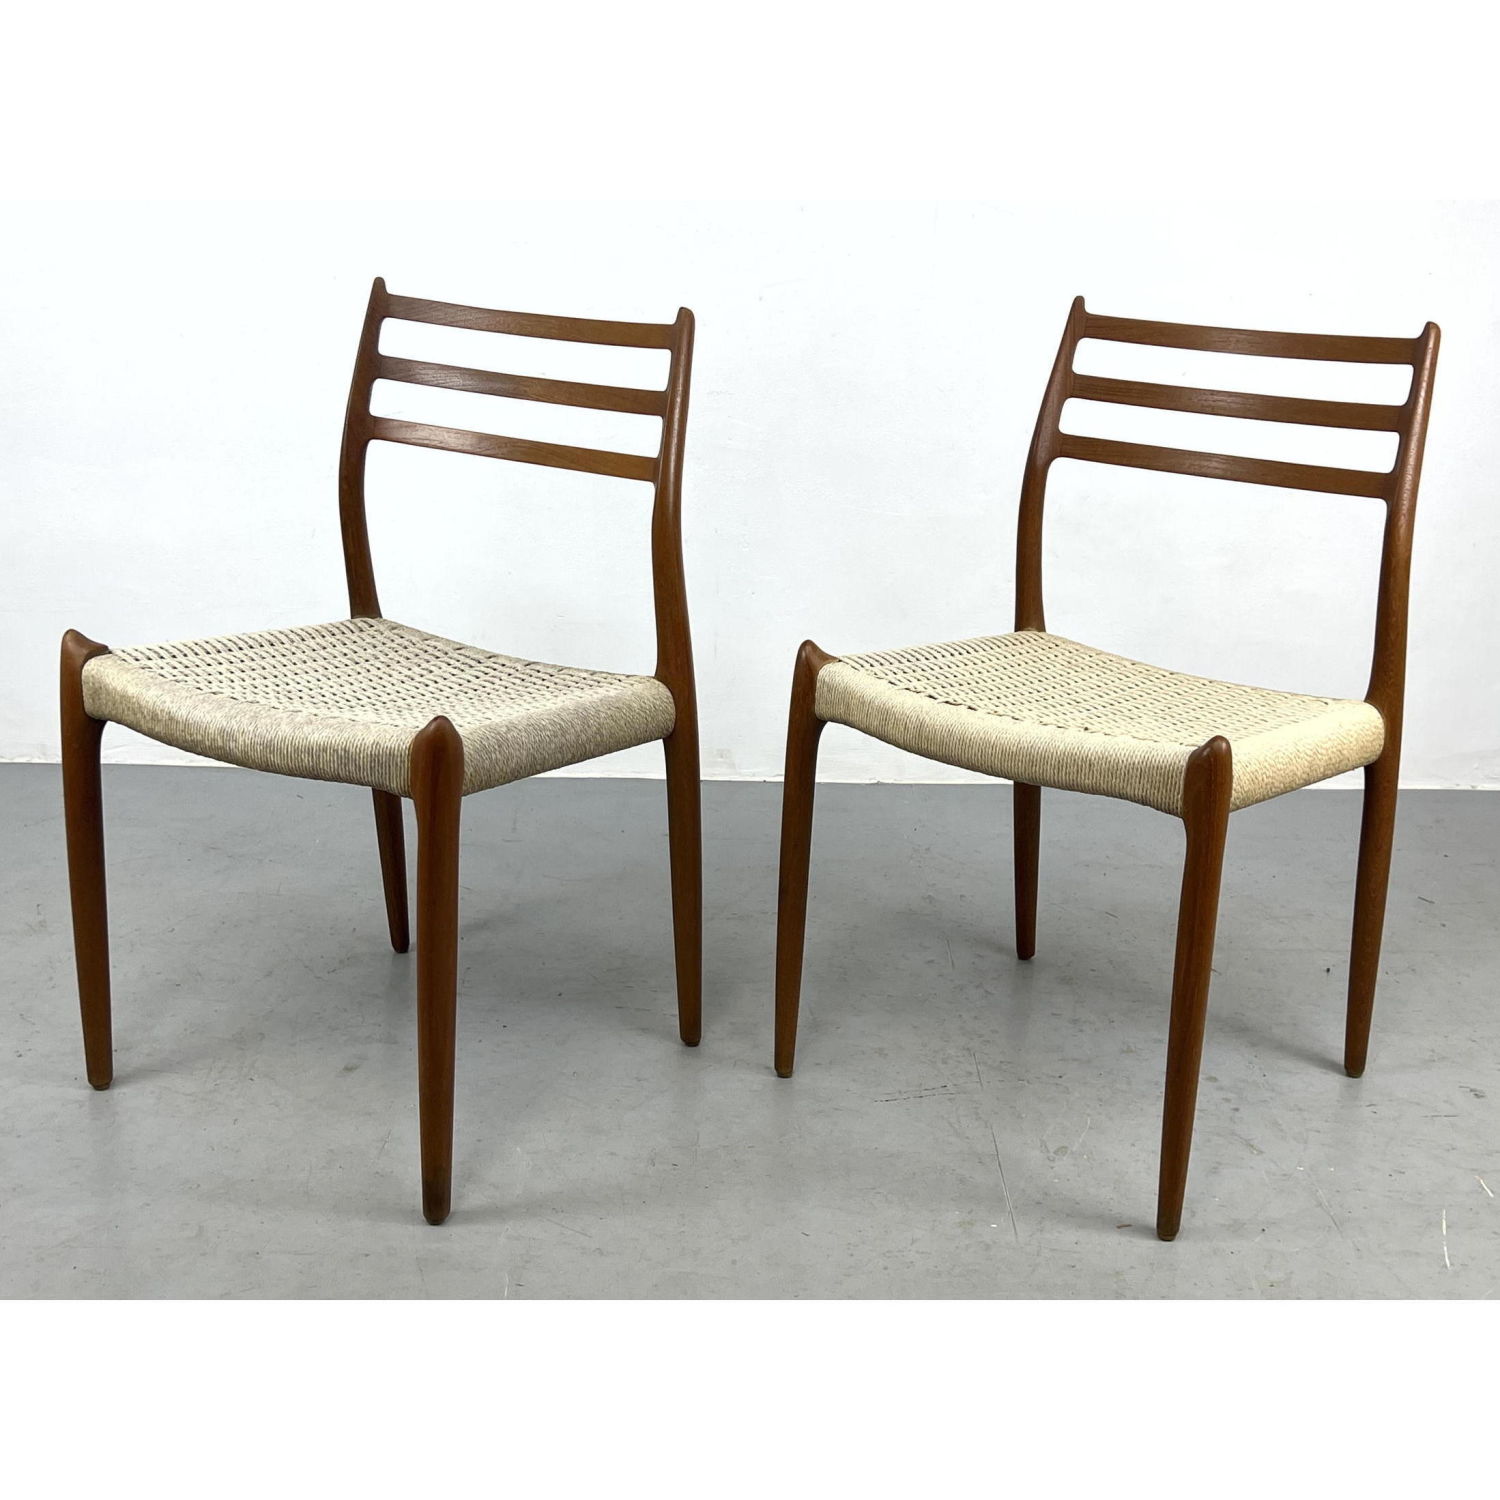 Pr NIELS MOLLER Teak Chairs with 2fe42d